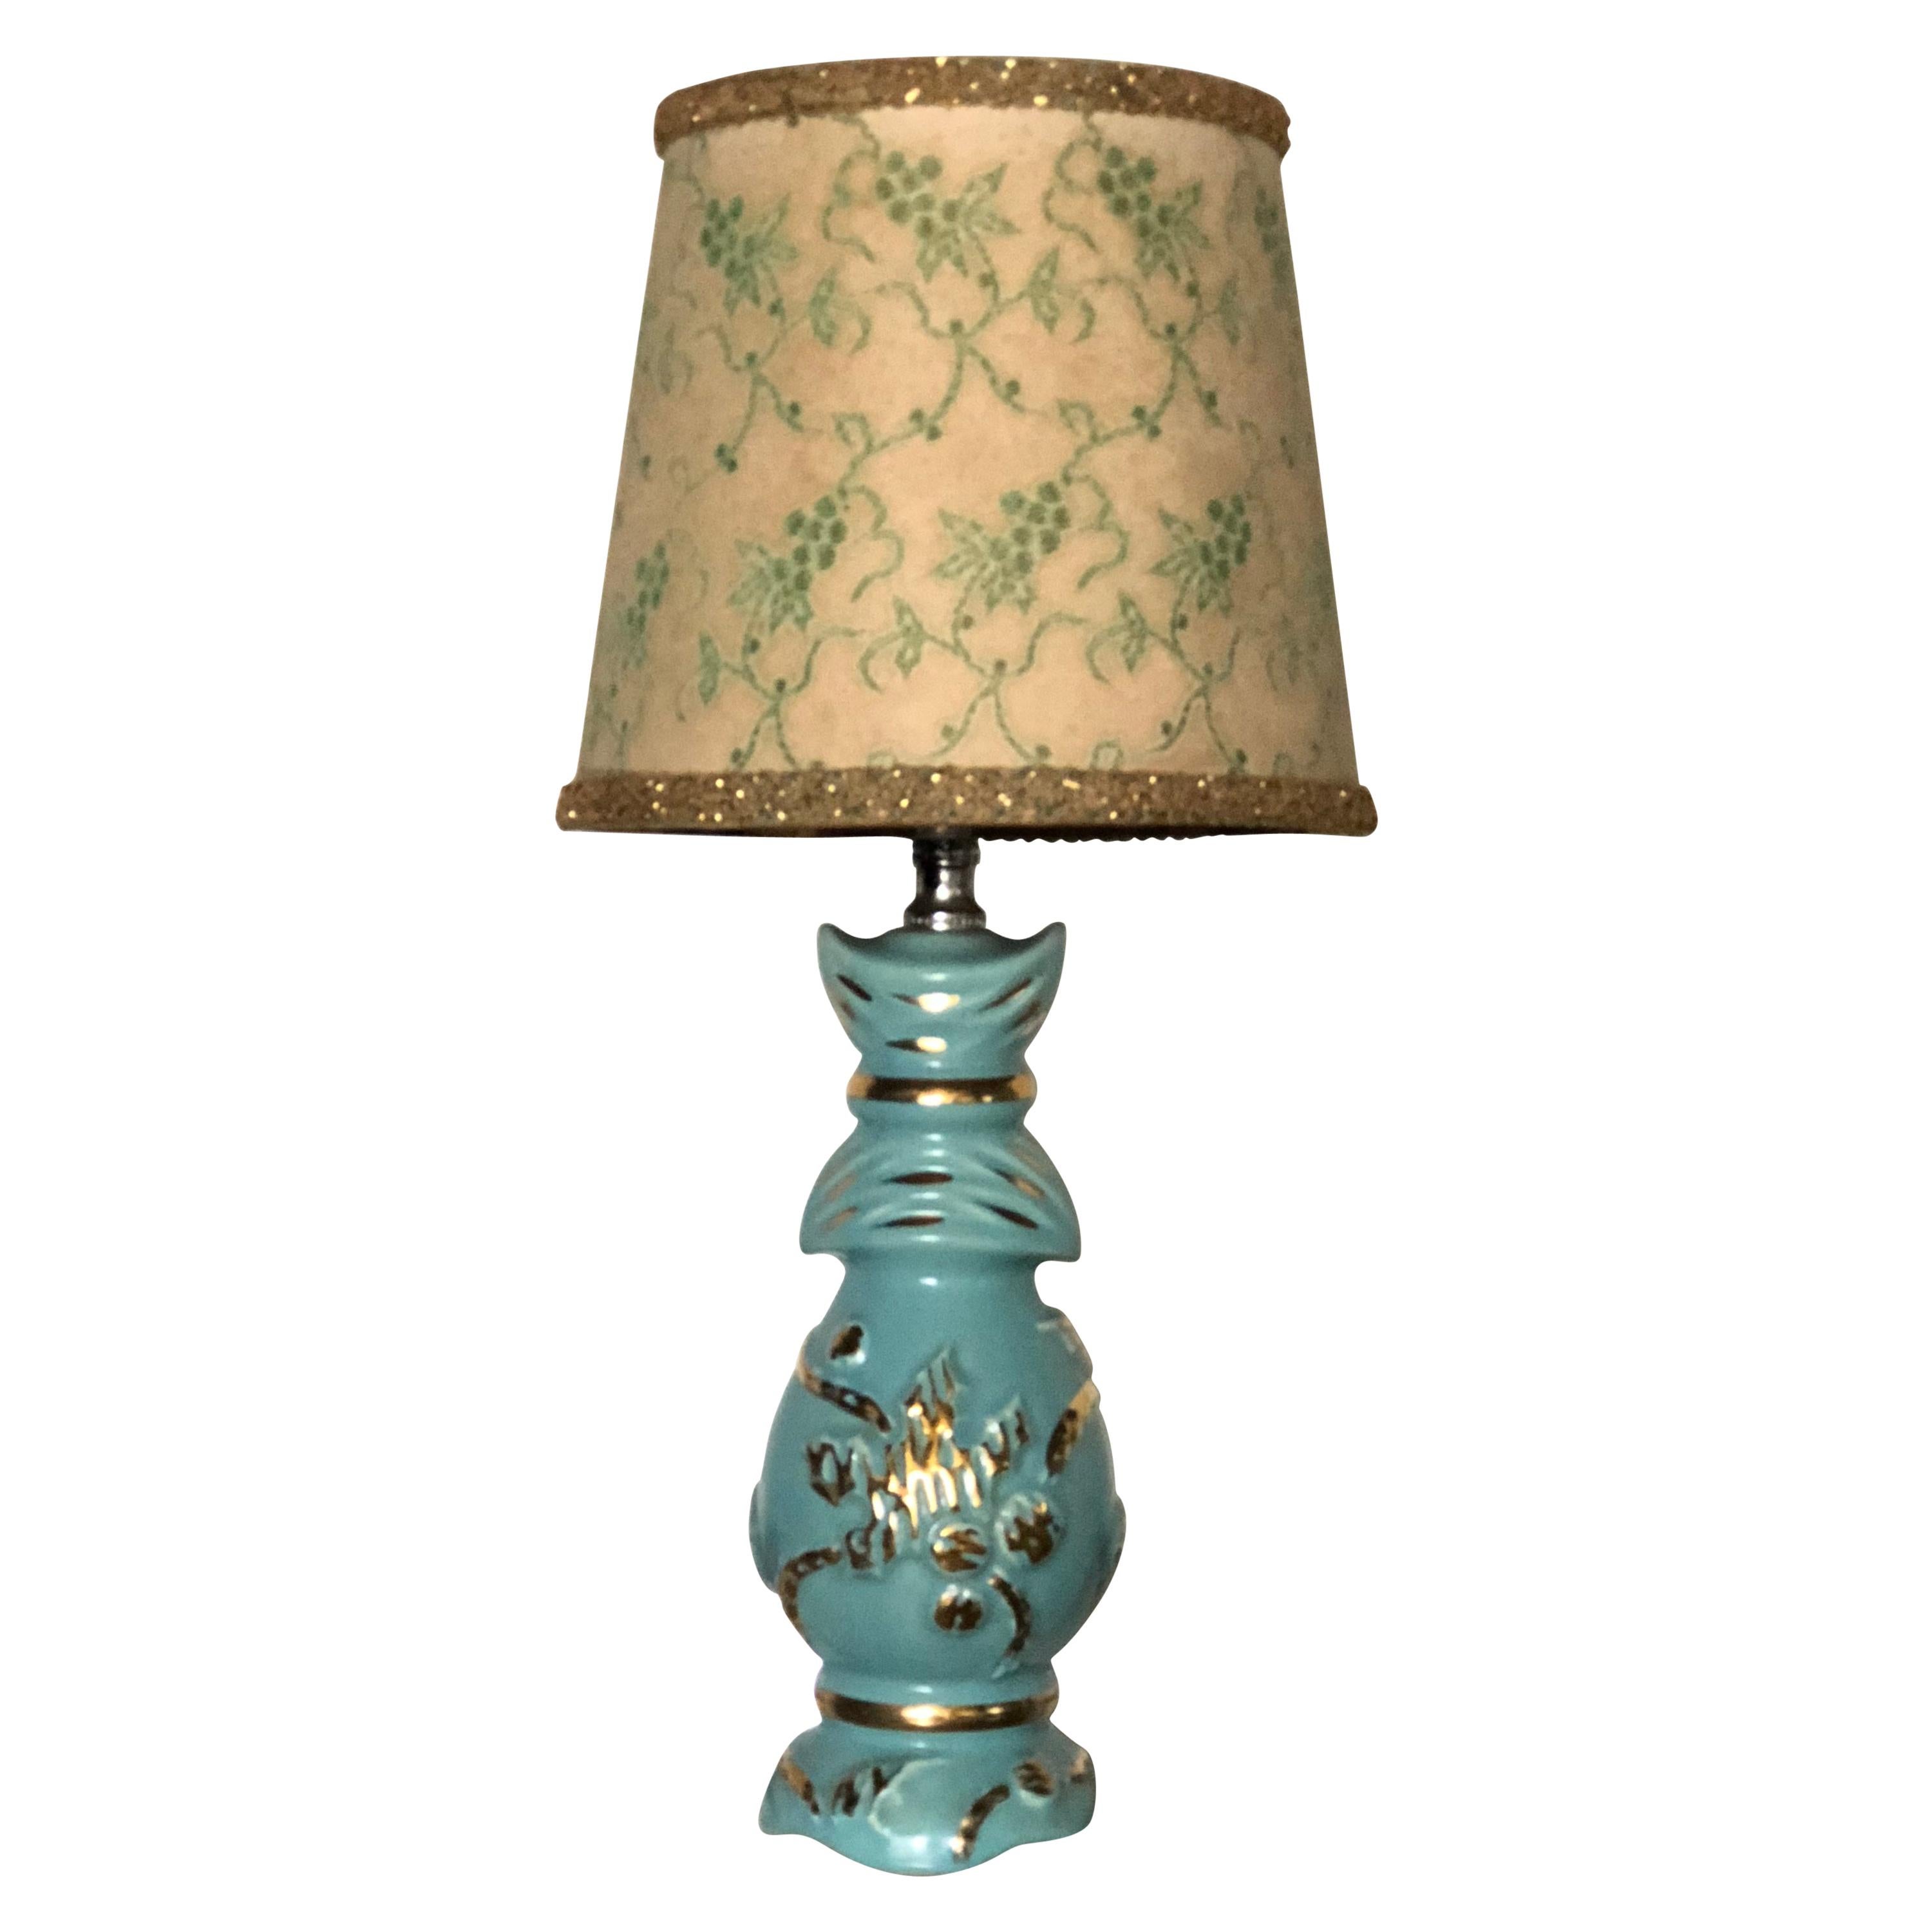 Petite Midcentury Turquoise and Gold Table Lamp with Original Floral Shade